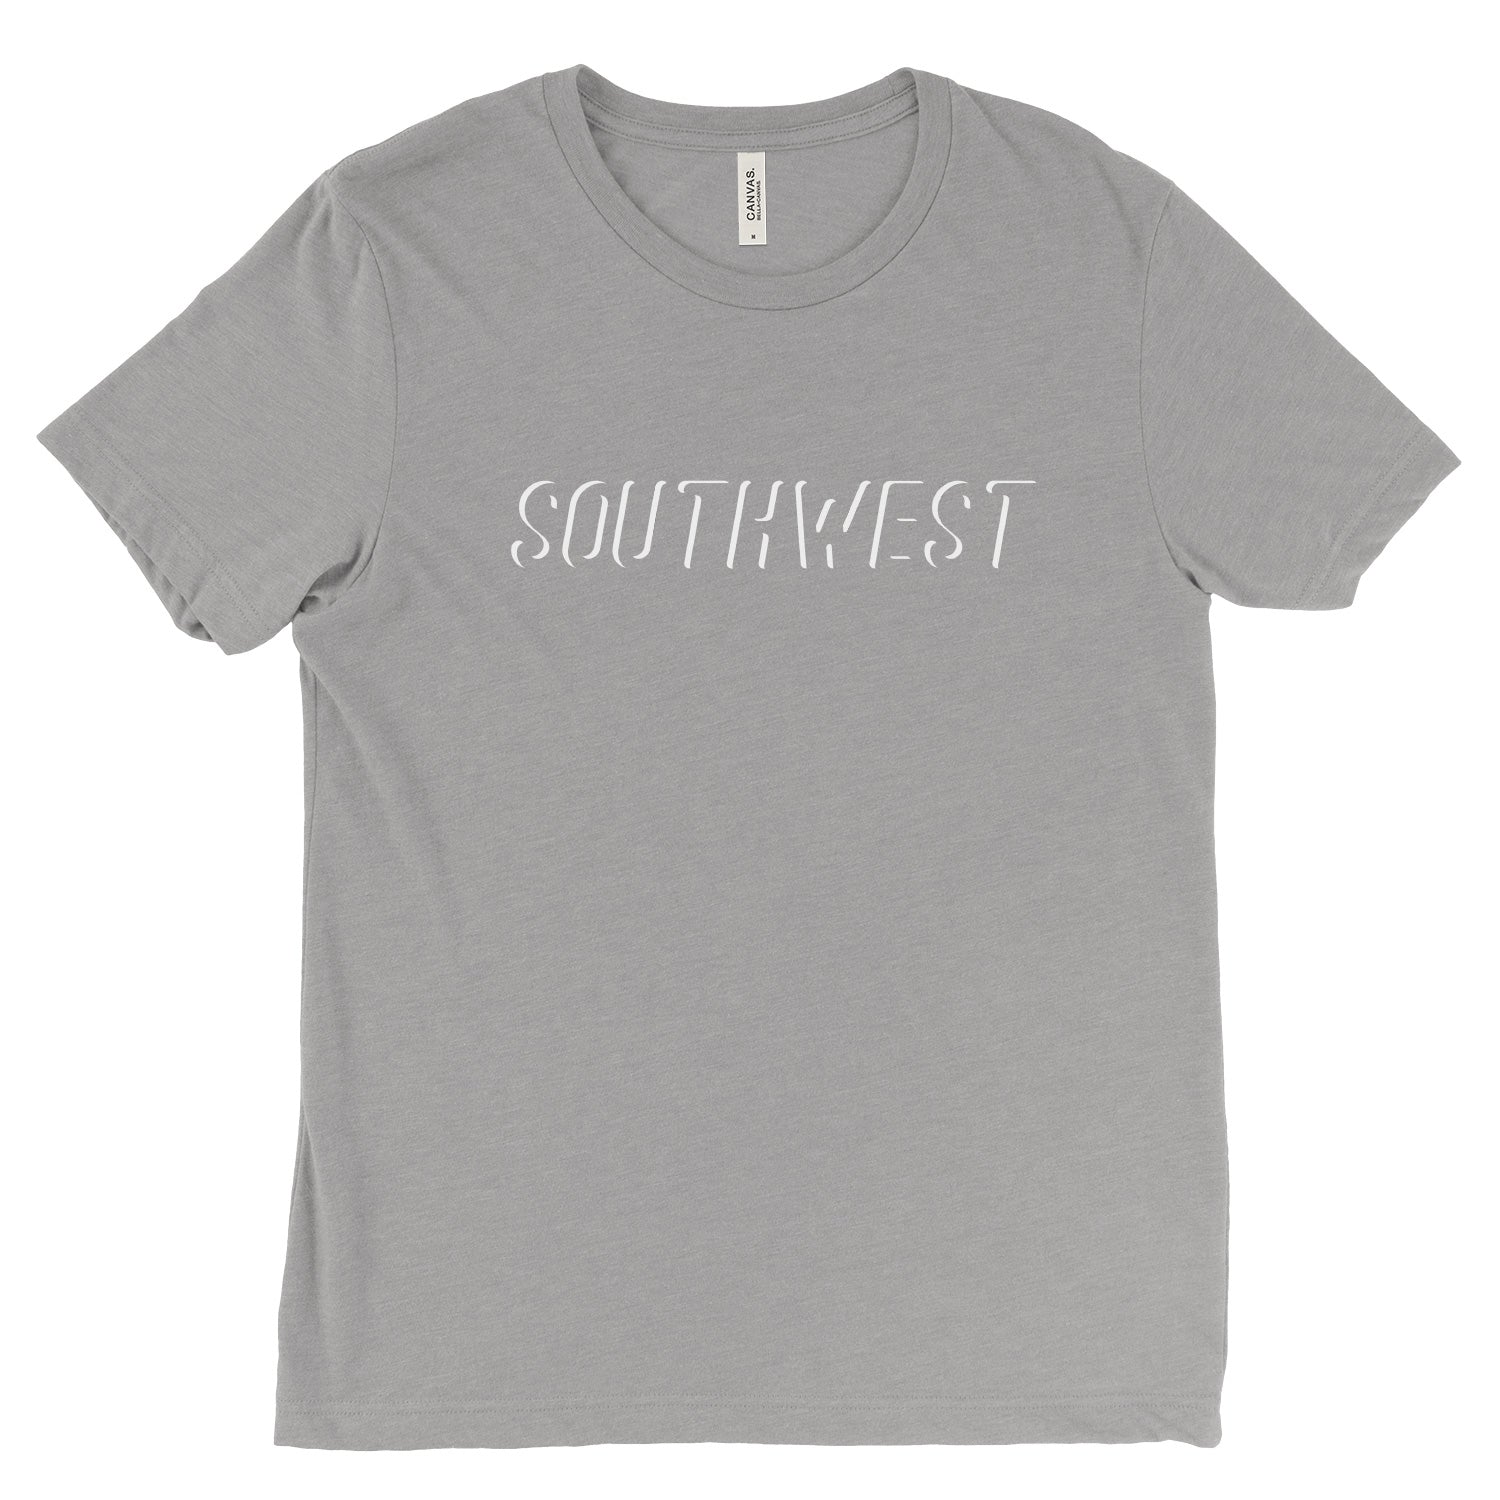 Southwest Disappear - Organ Mountain Outfitters